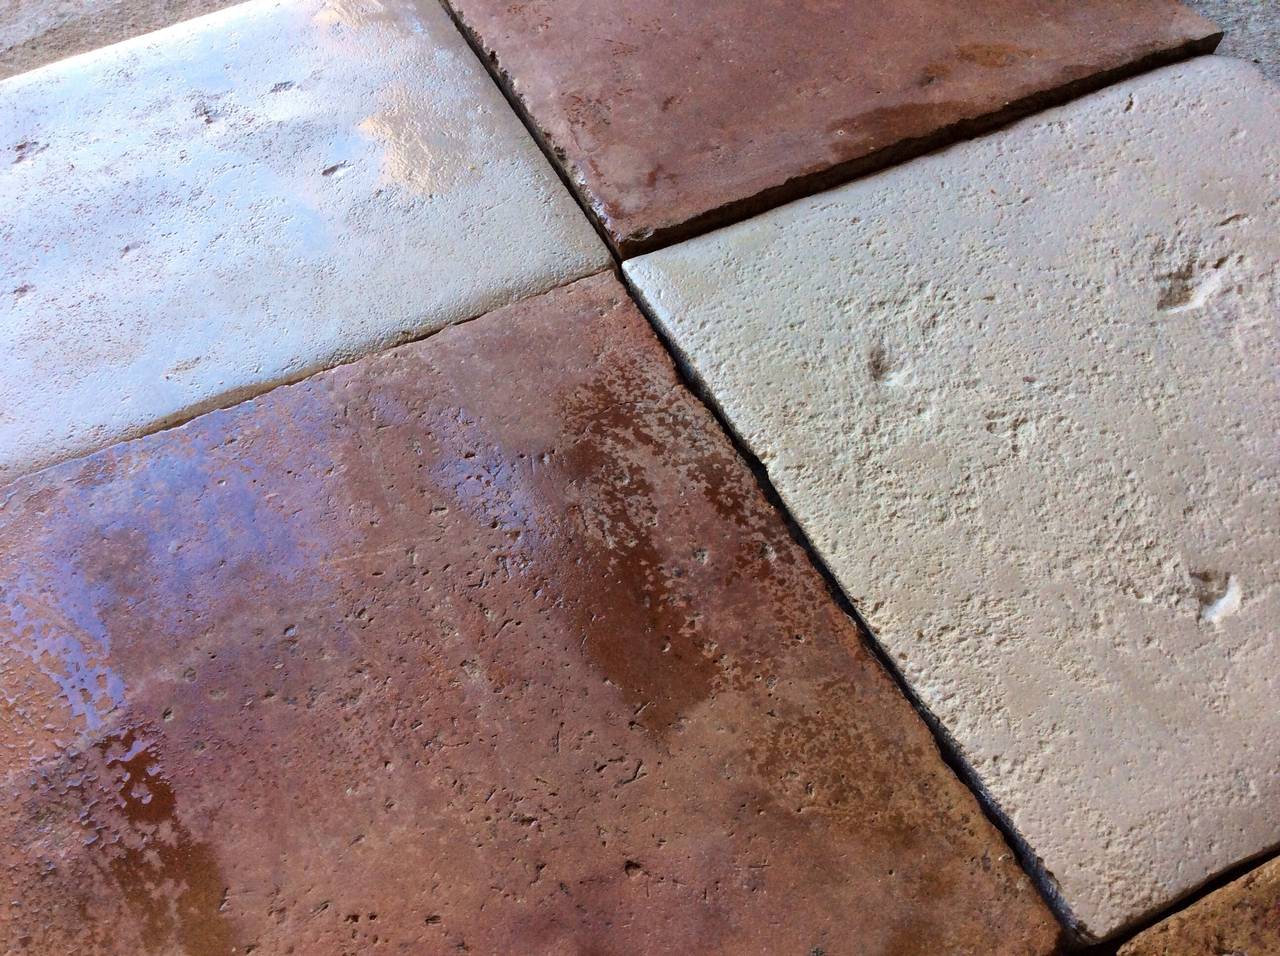 Stock 22m2 of antique terracotta and recycled burgundy stone floors, size 32,5 cm x 32,5 cm, and 2,7 cm thick.
Truly unique, this small stock recovered and recycled to the first years of the 1900s

further discounted price $ 6,000